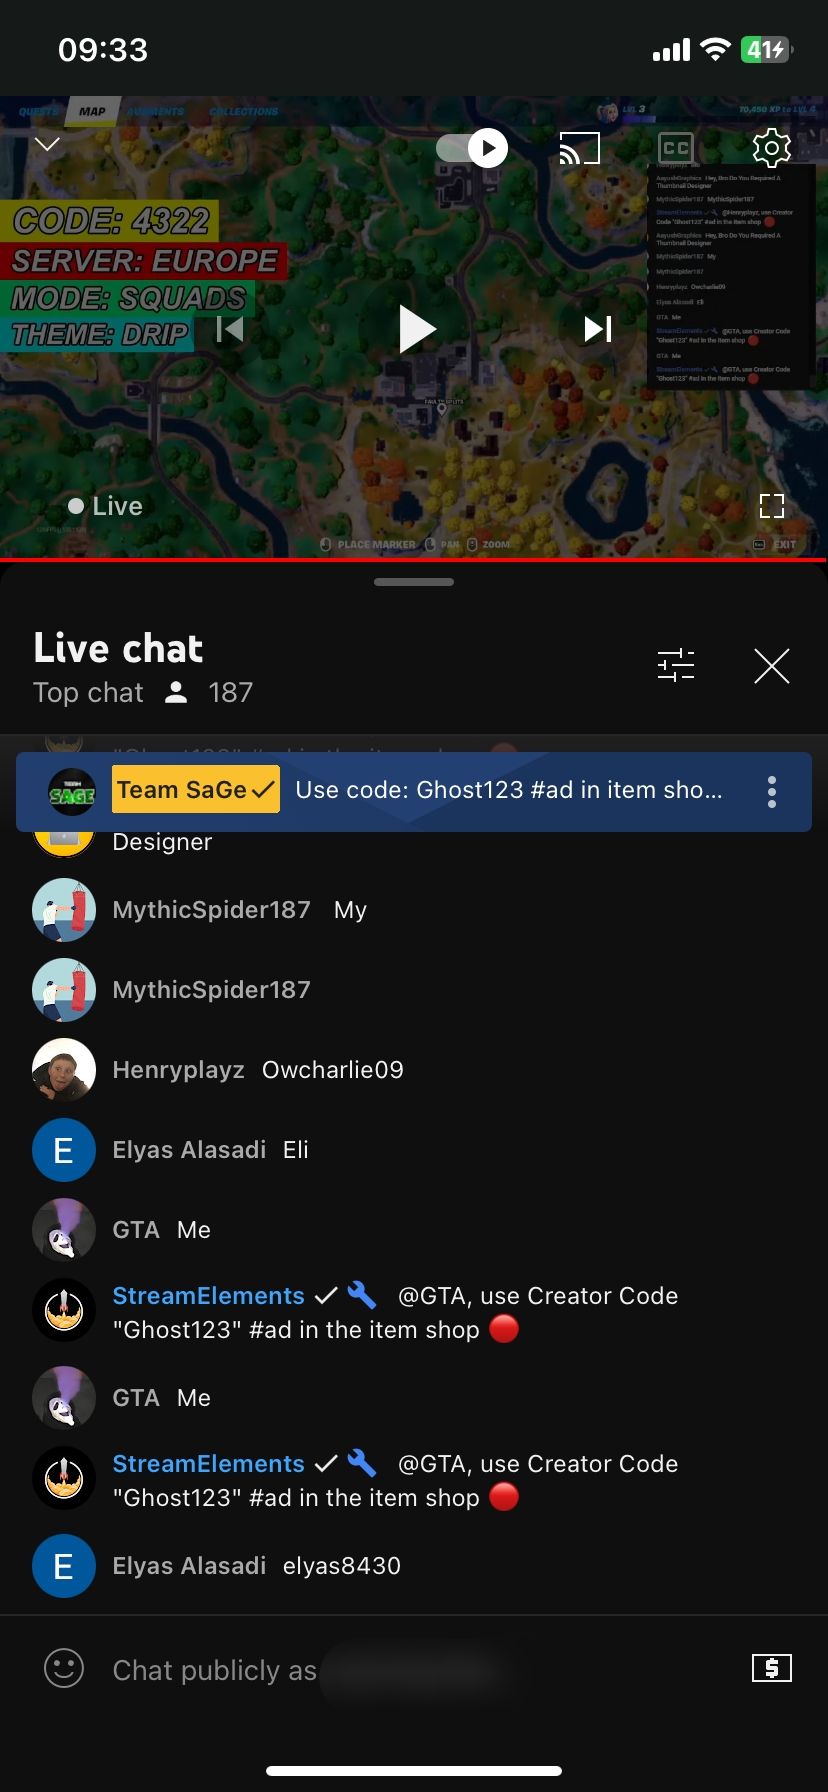 A YouTube livestream on mobile